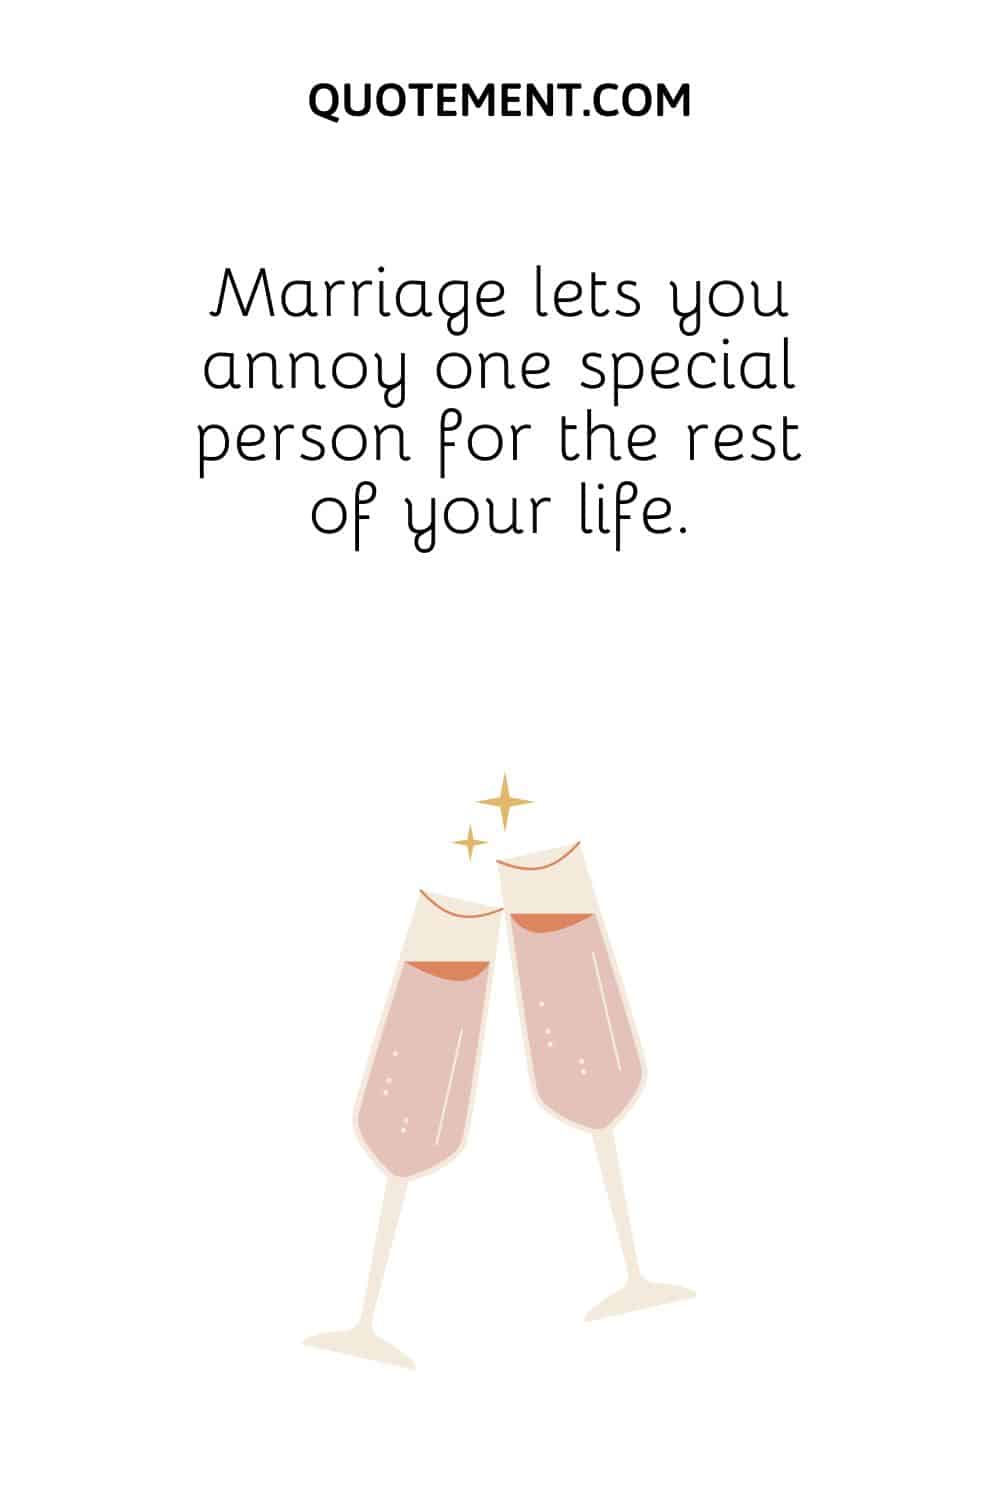 Marriage lets you annoy one special person for the rest of your life.